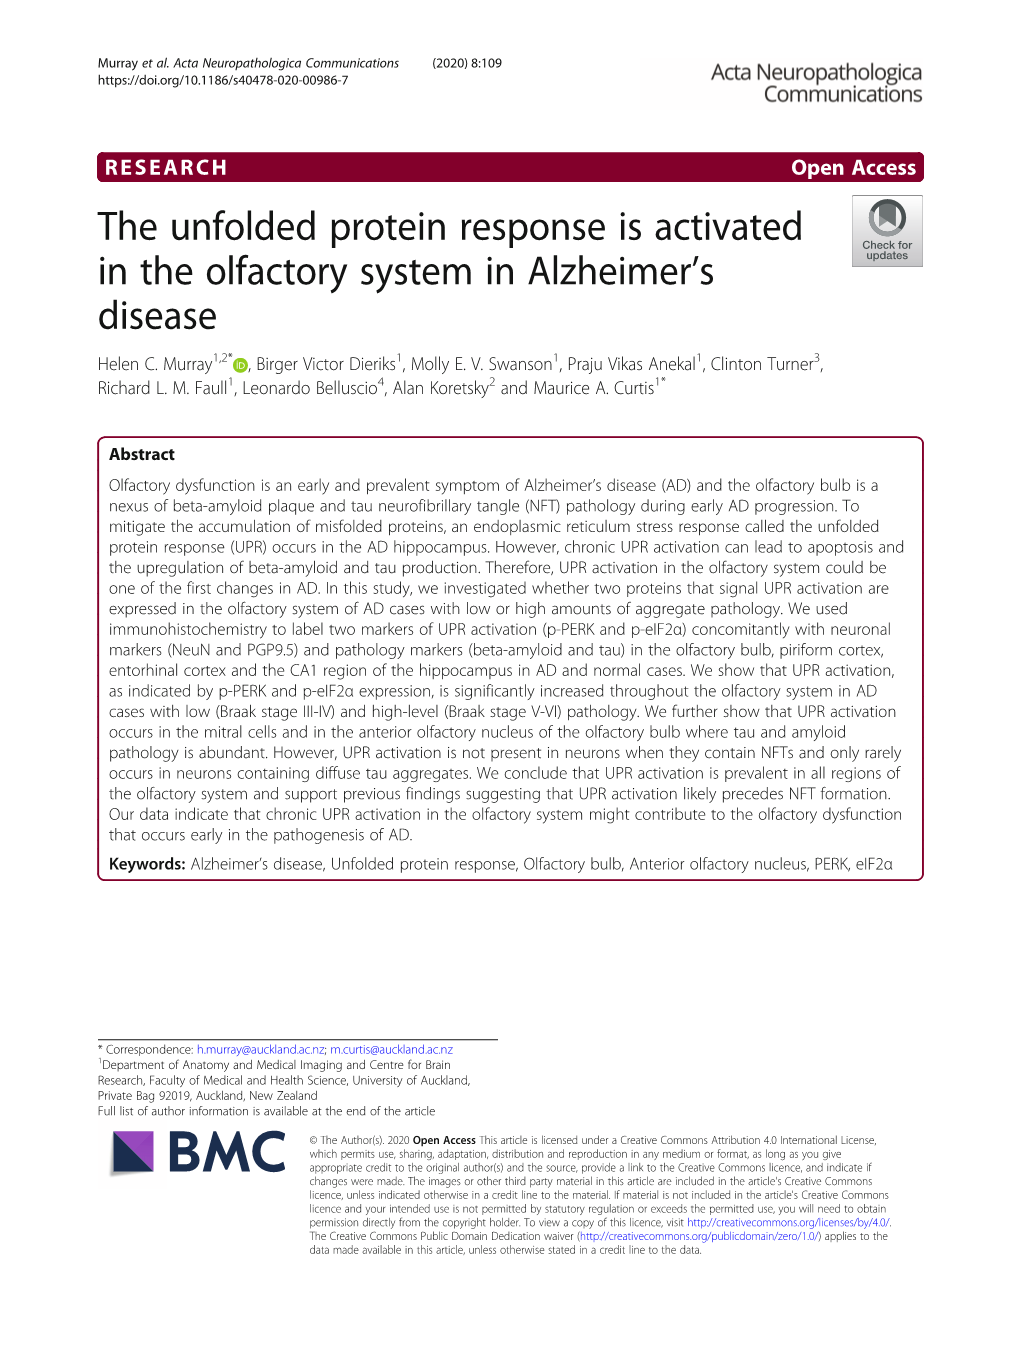 The Unfolded Protein Response Is Activated in the Olfactory System in Alzheimer’S Disease Helen C